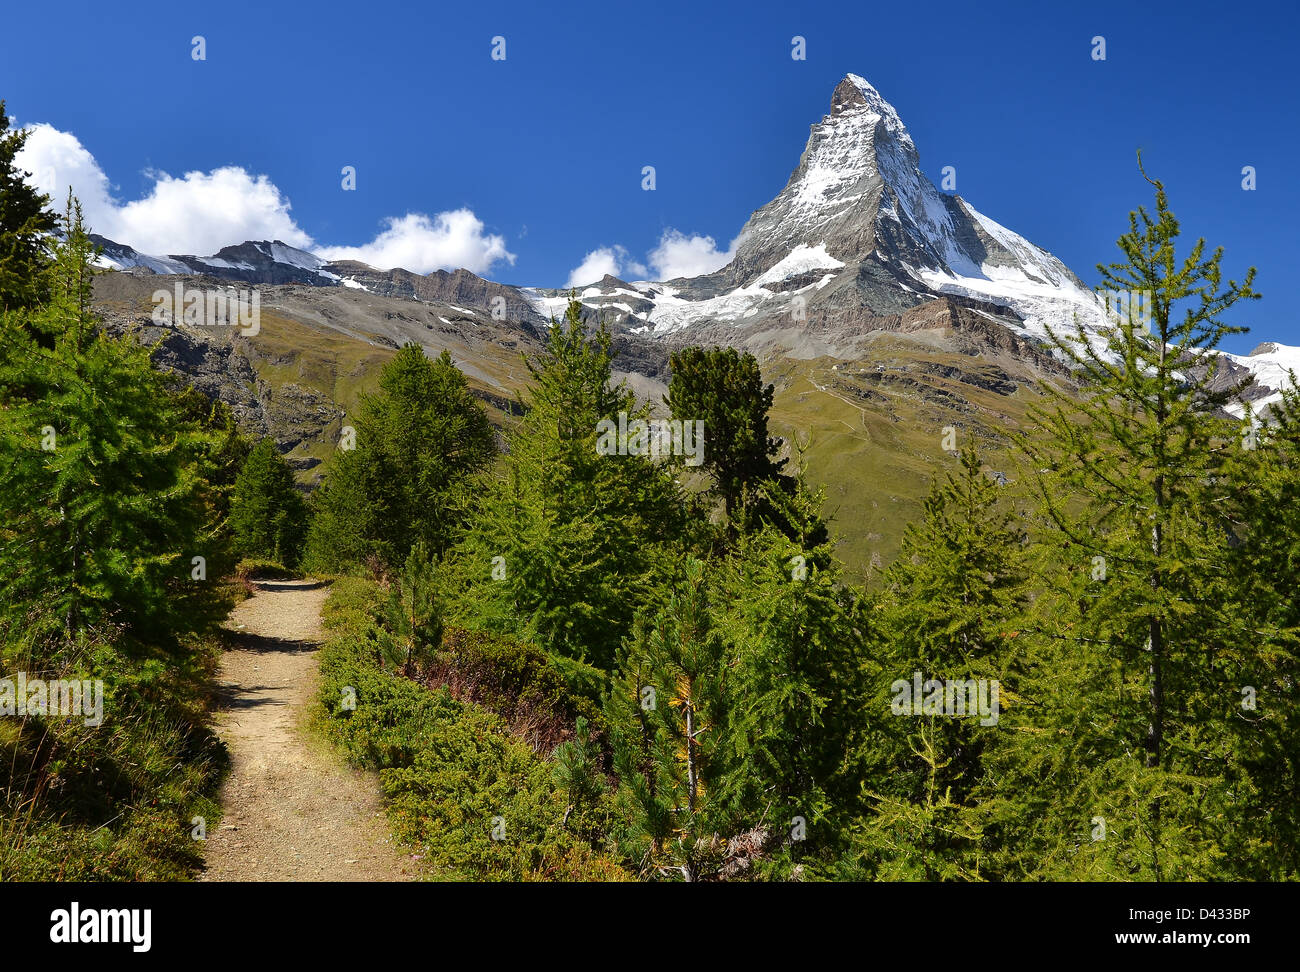 Matterhorn (Monte Cervino), Switzerland. One of the highest mountains from Alps and Europe Stock Photo